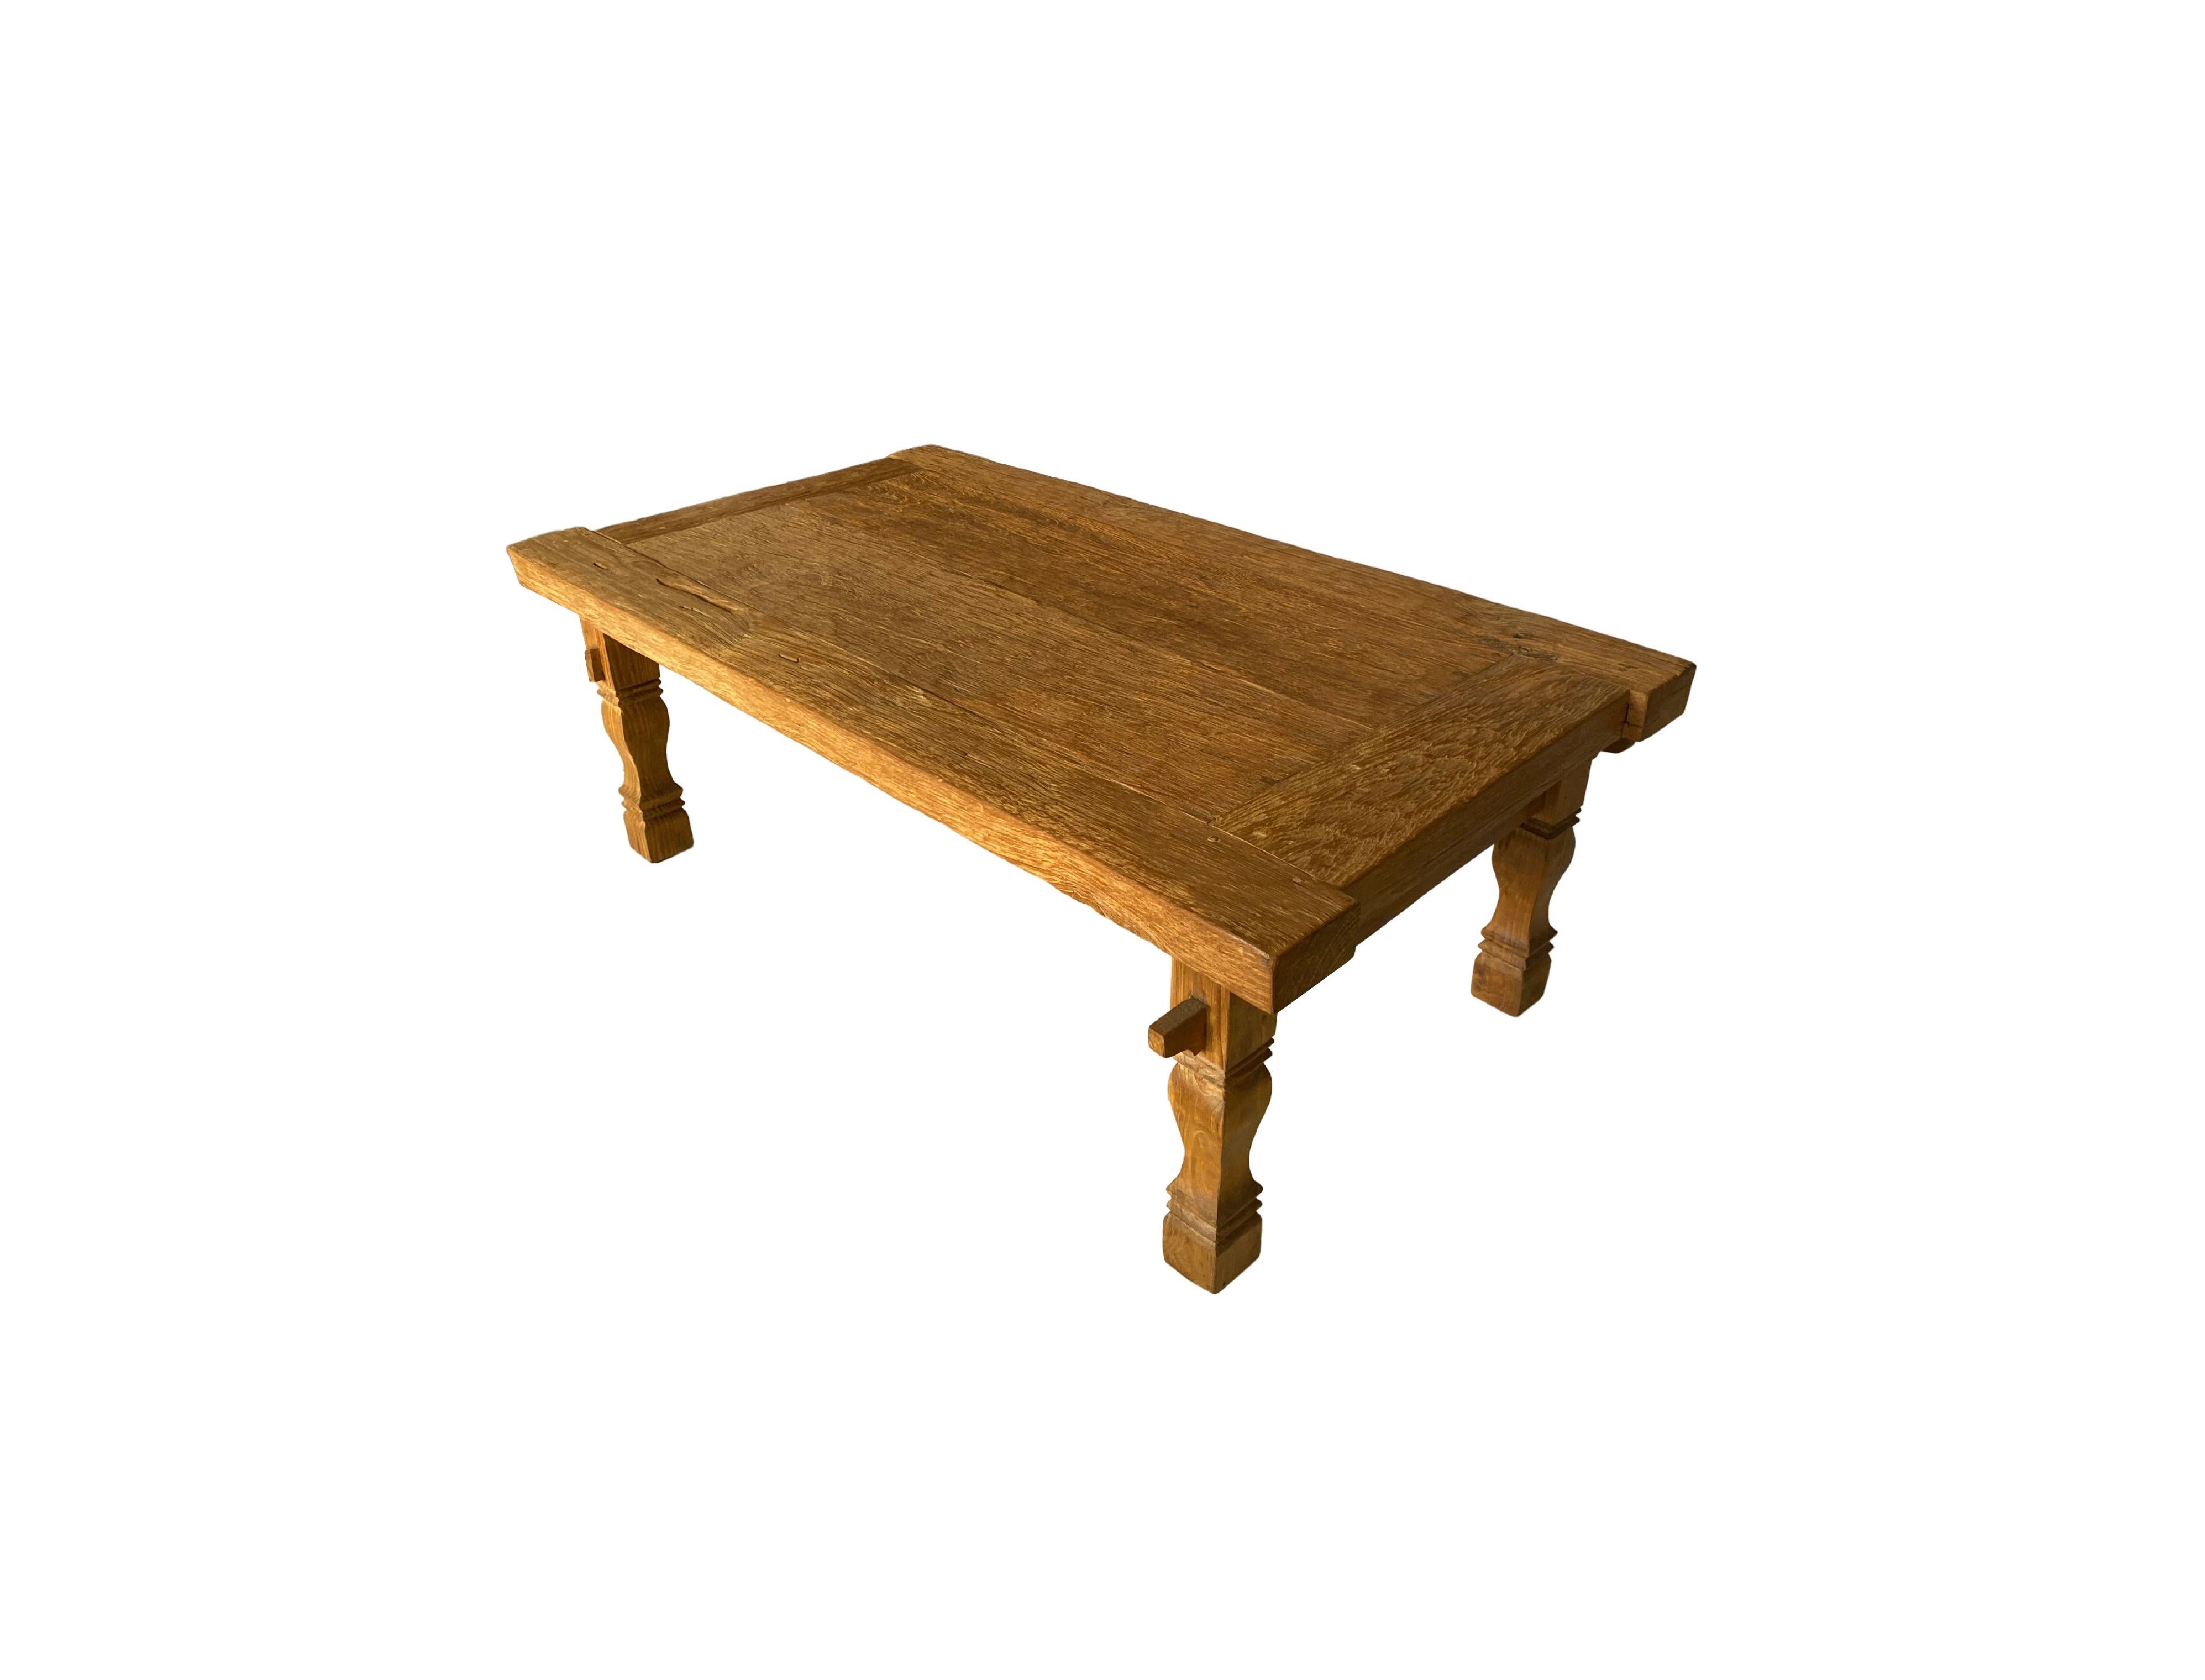 Hand-Crafted Organic Teak Wood Table with Stunning Wood Pattern Detailing